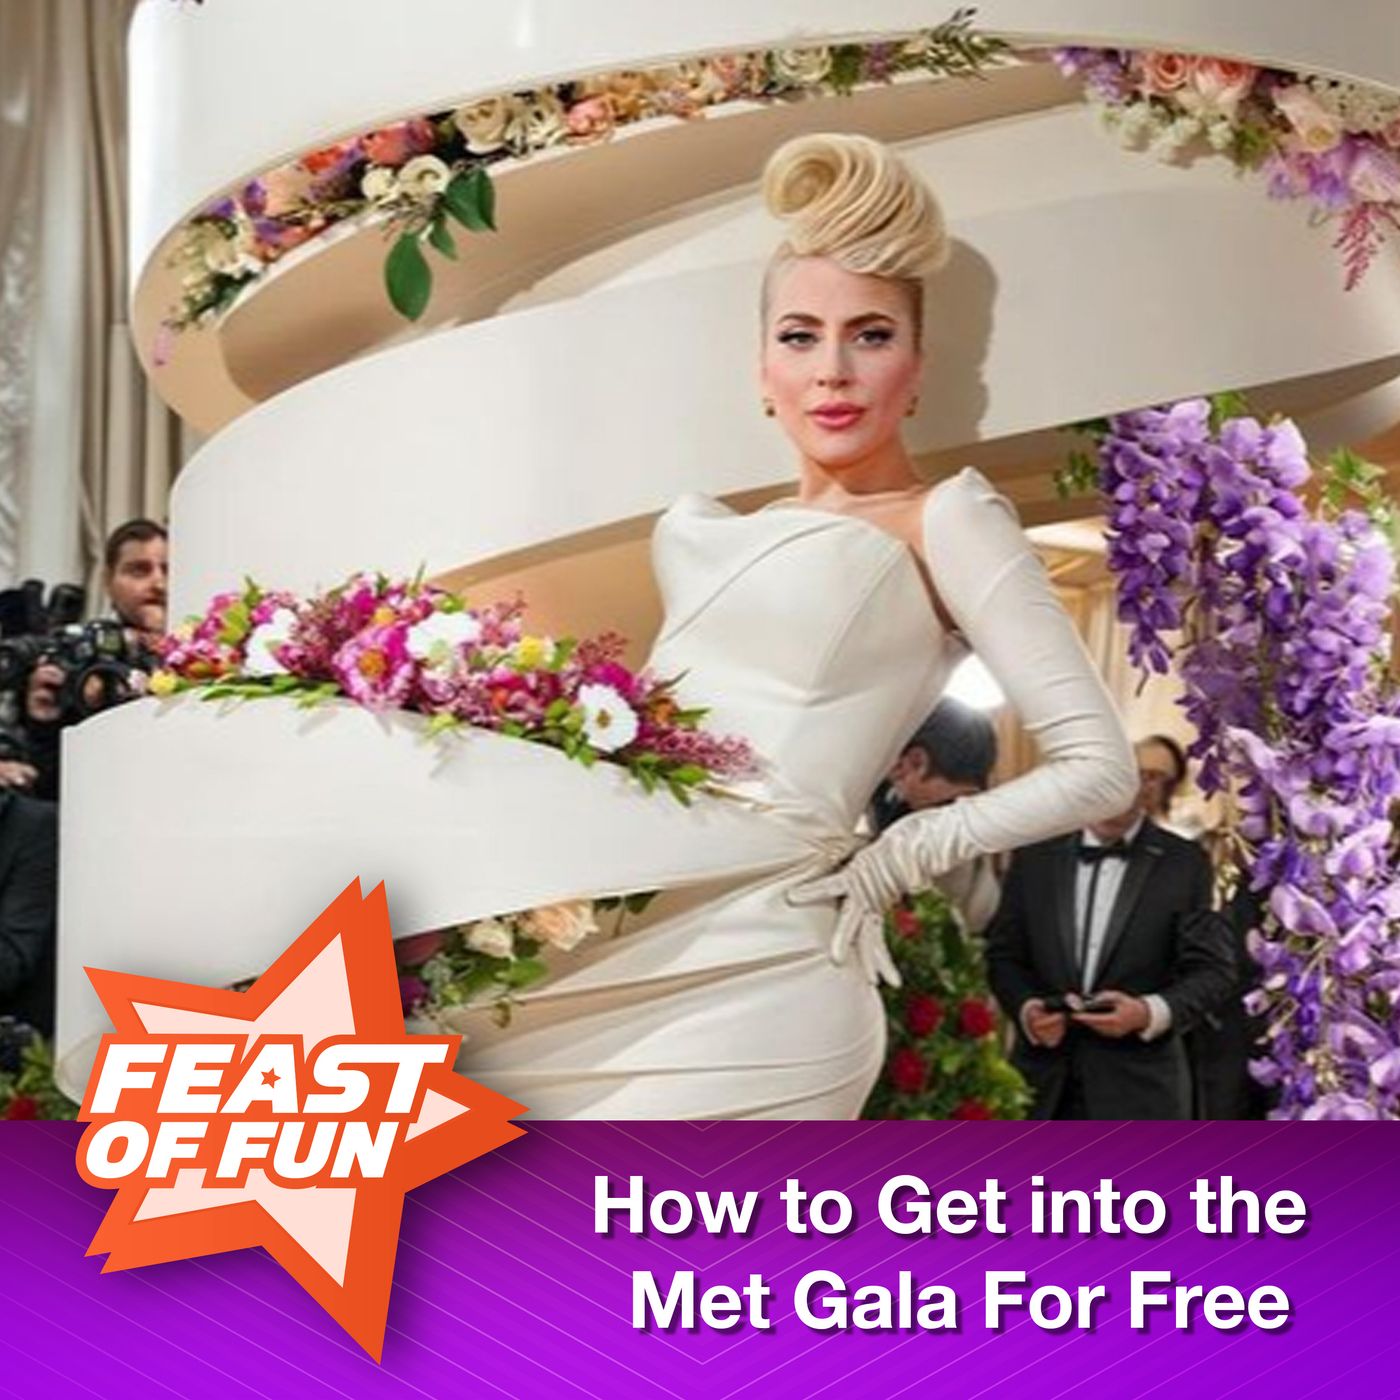 How to Get into the Met Gala For Free